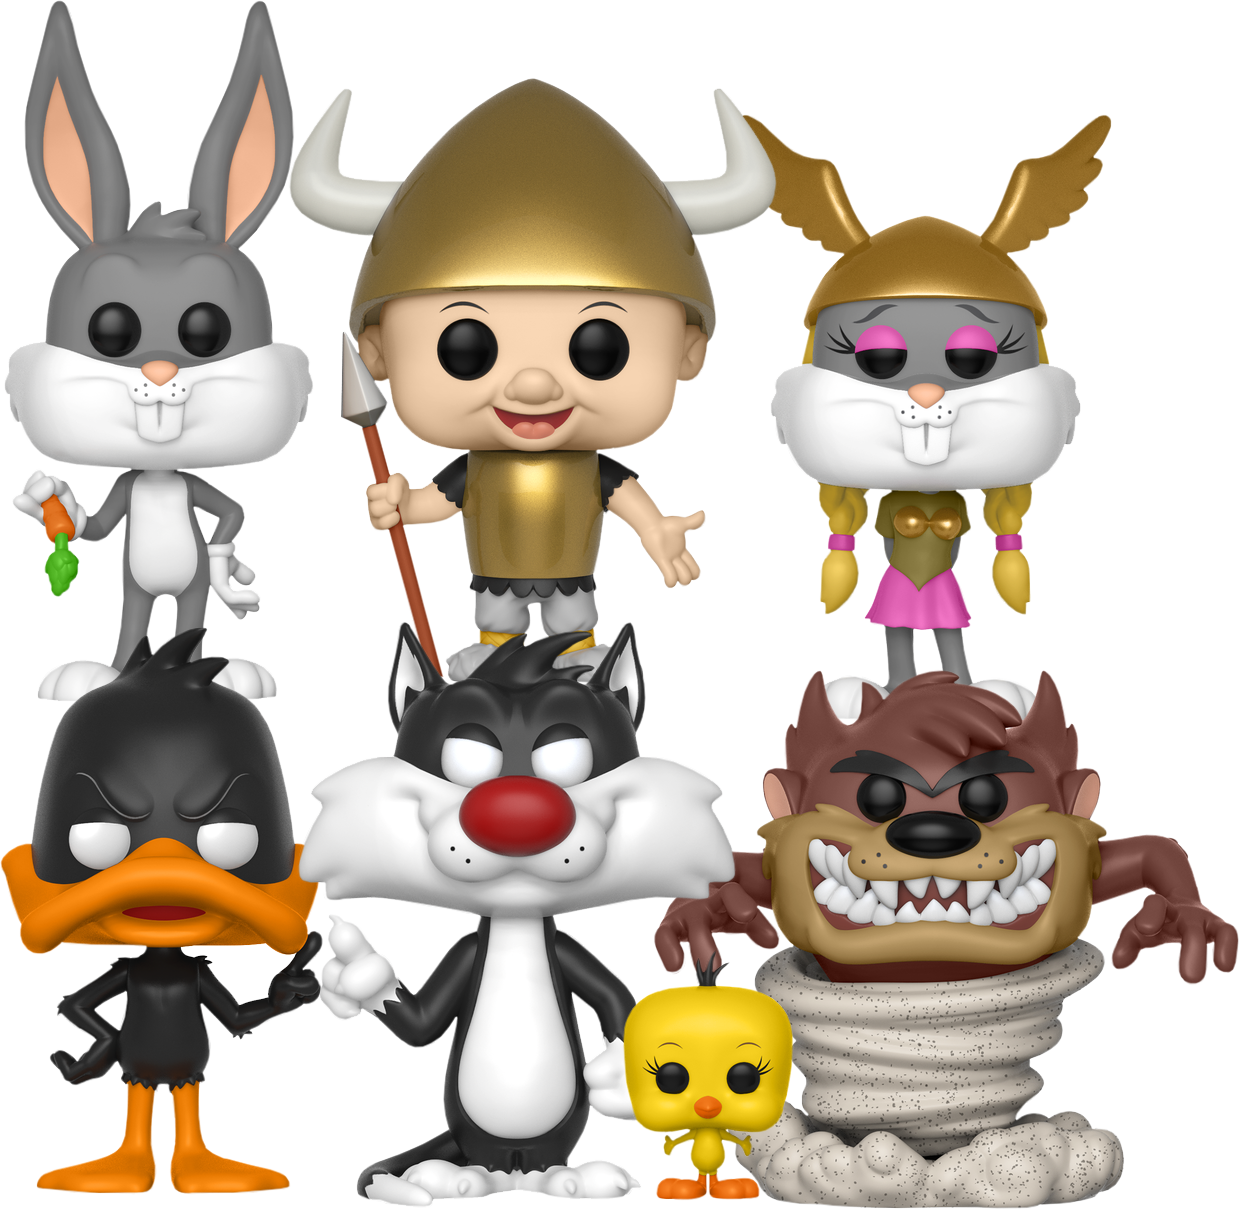 Top Images For Baby Looney Tunes Toys On Emp - Looney Tunes Pop Vinyls (1240x1210)